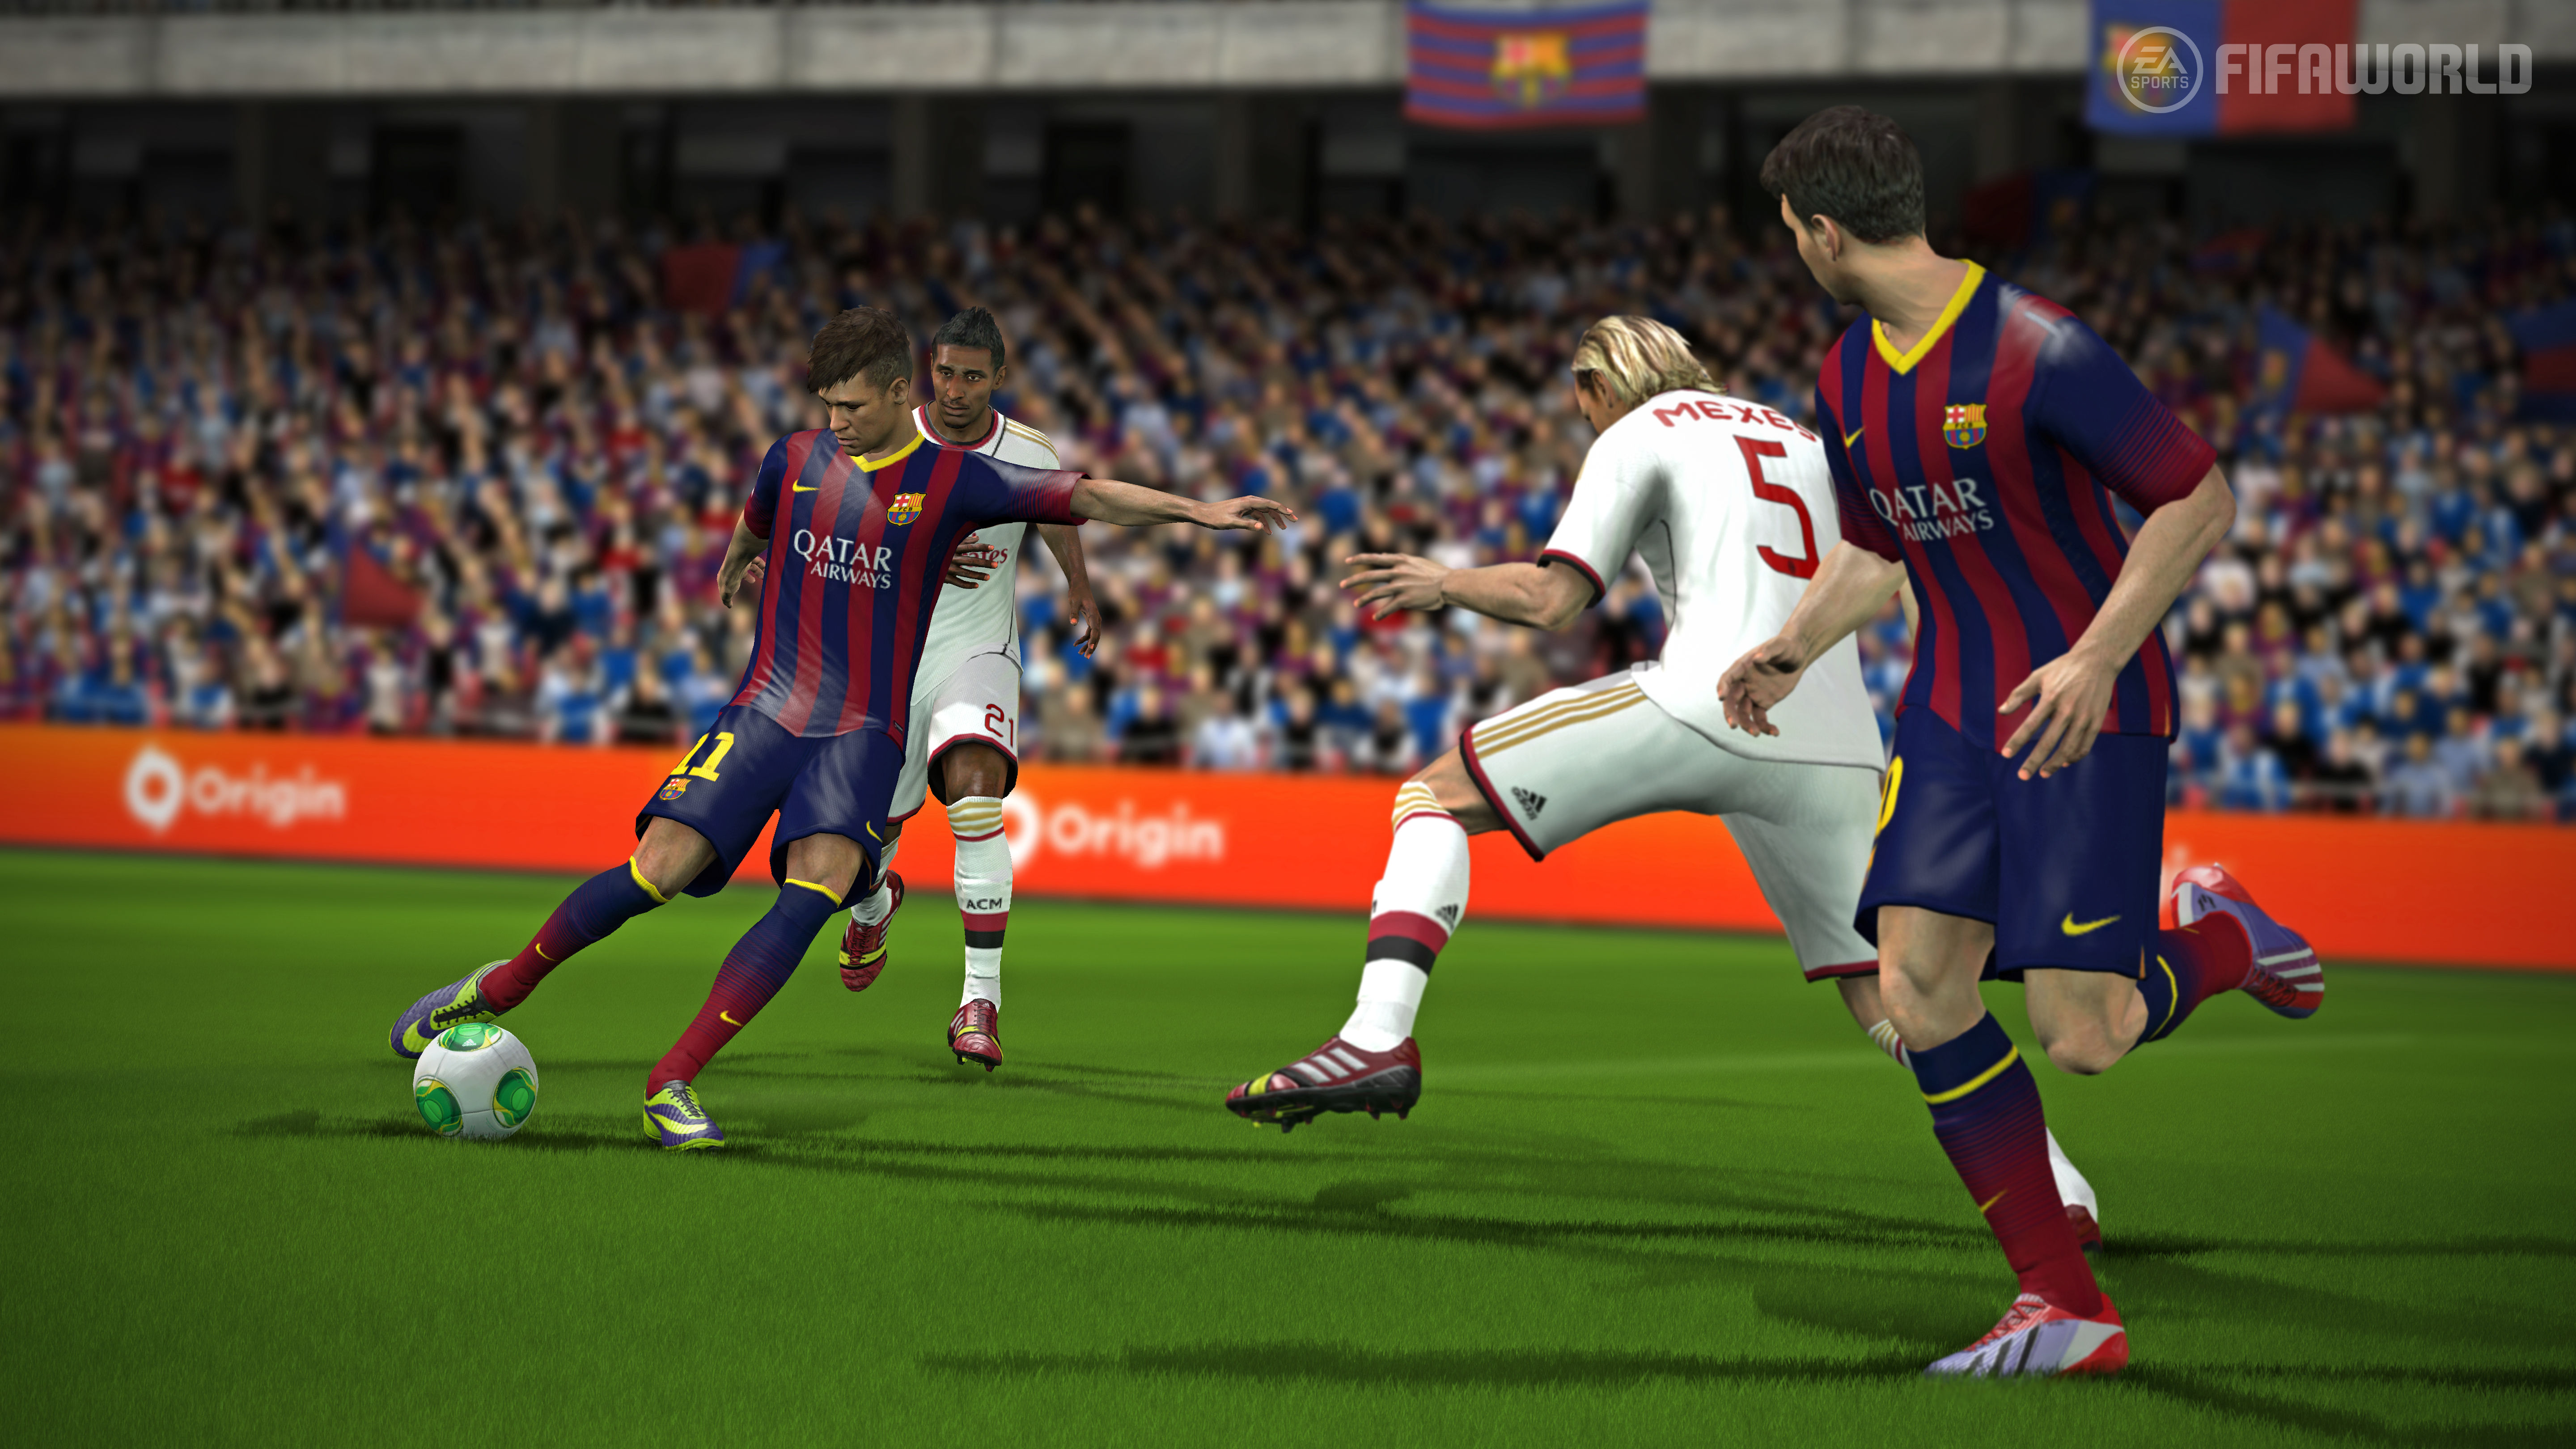 After a limited test, EA launches FIFA World open beta on PC worldwide